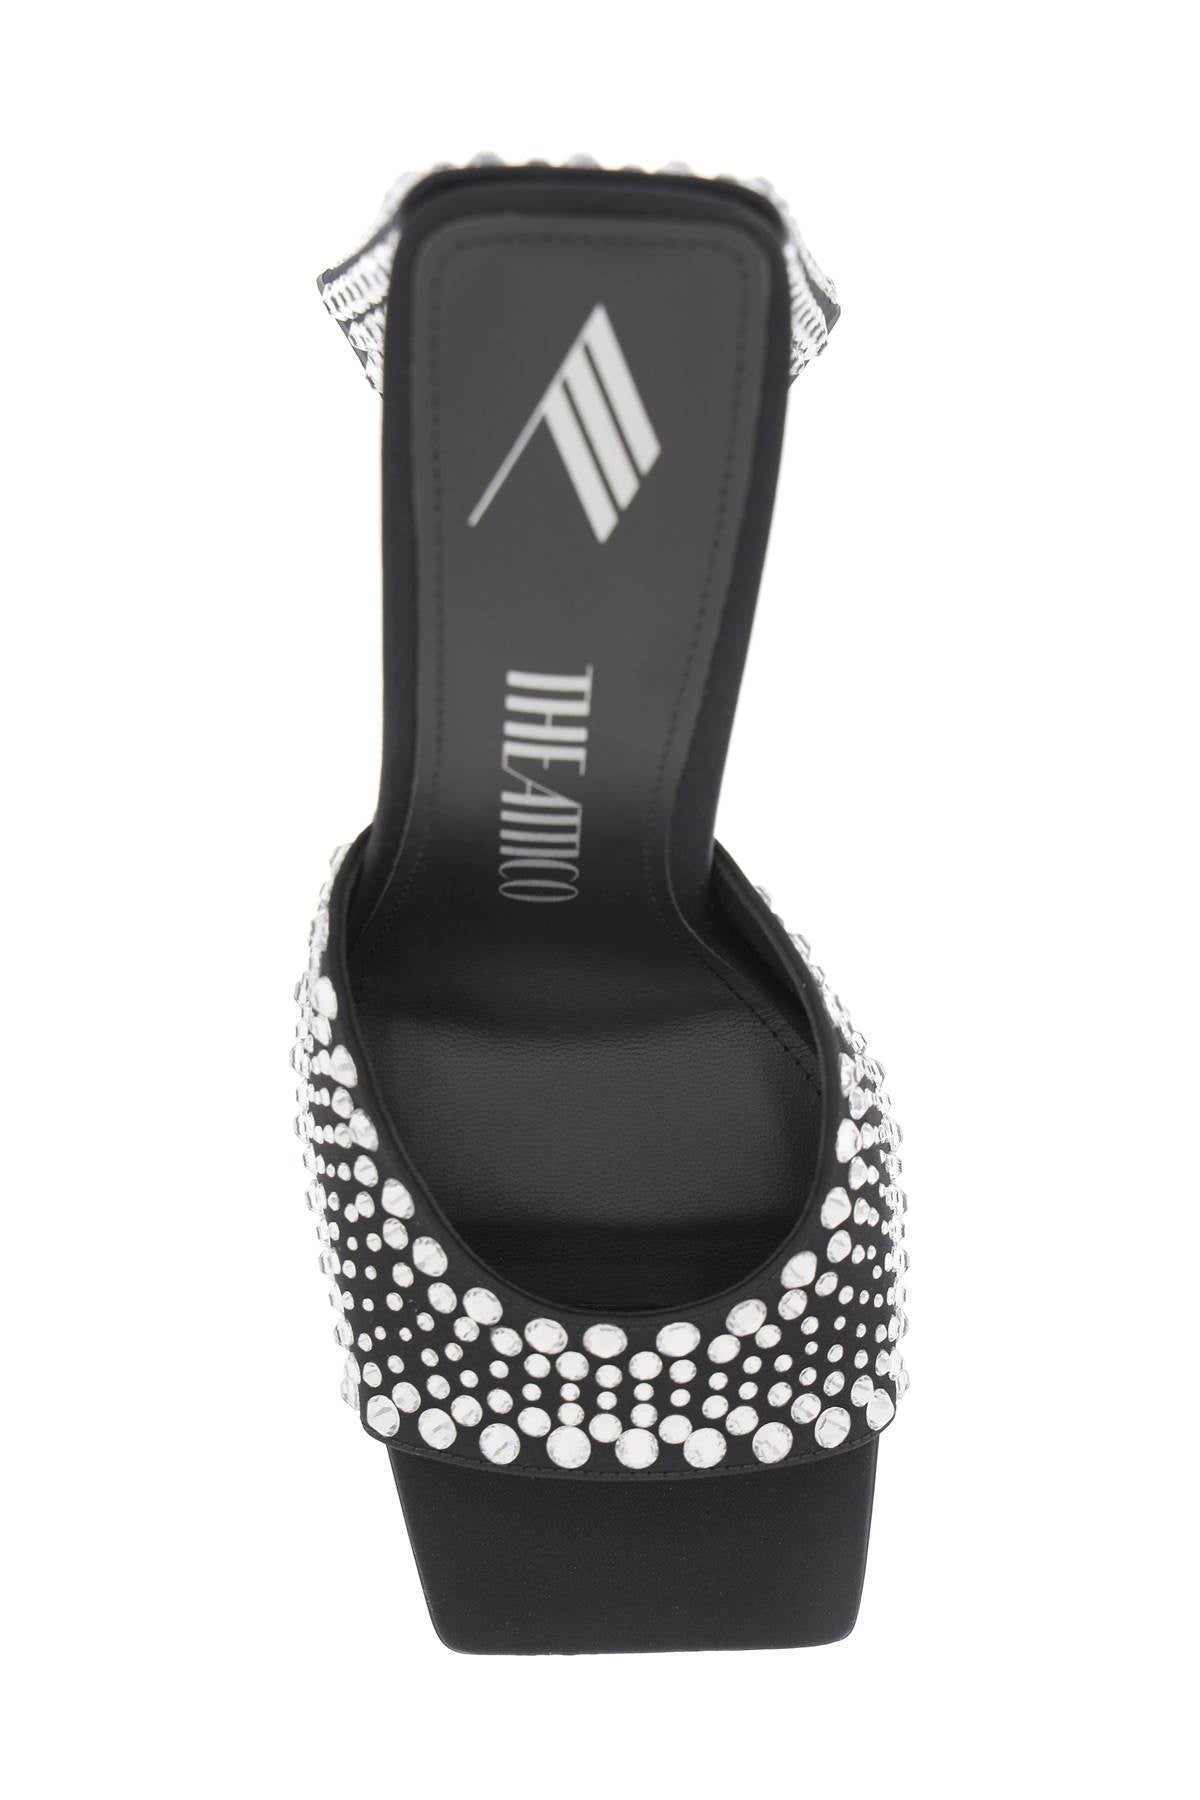 THE ATTICO Crystal-Studded Satin Flat with Pyramid Heel for Women